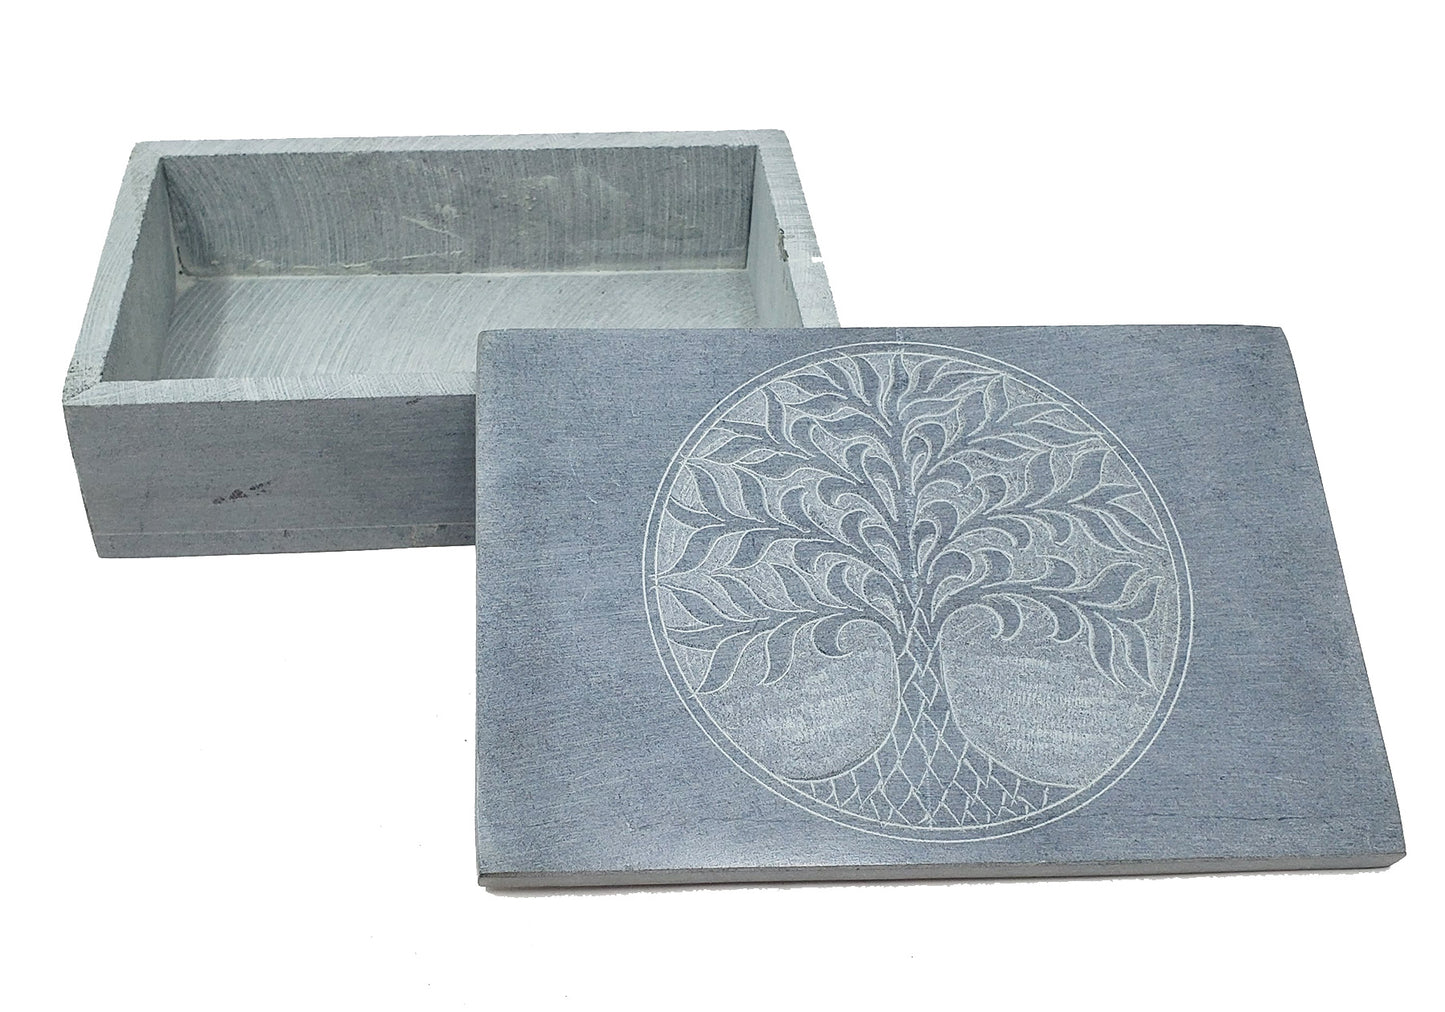 Tree of Life Carved Soap Stone Box - 4 x 6 inch - NEW1222